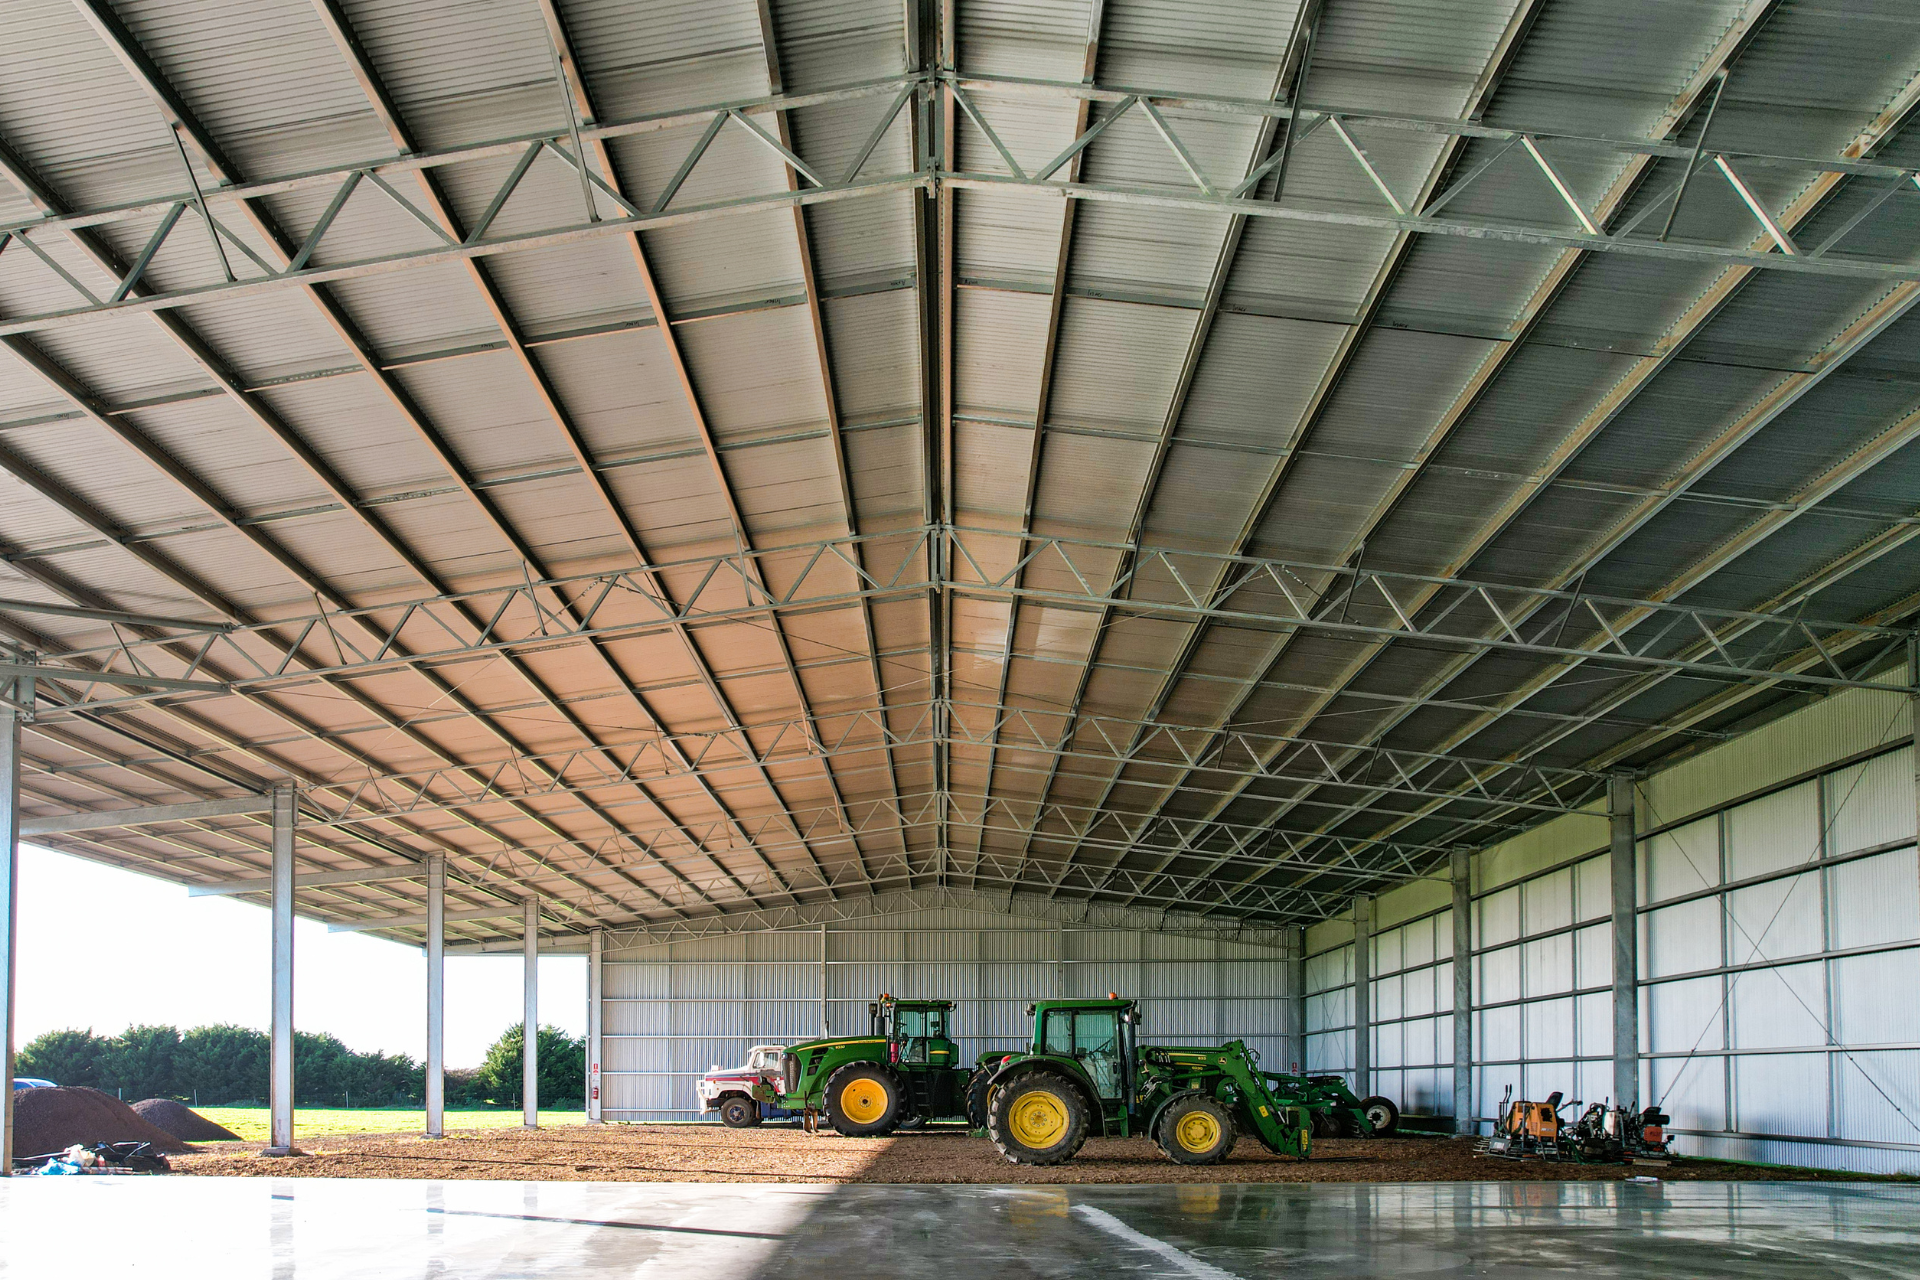 A 56m x 24m x 6.75m machinery shed with 6 metre canopy at Carranballac VIC